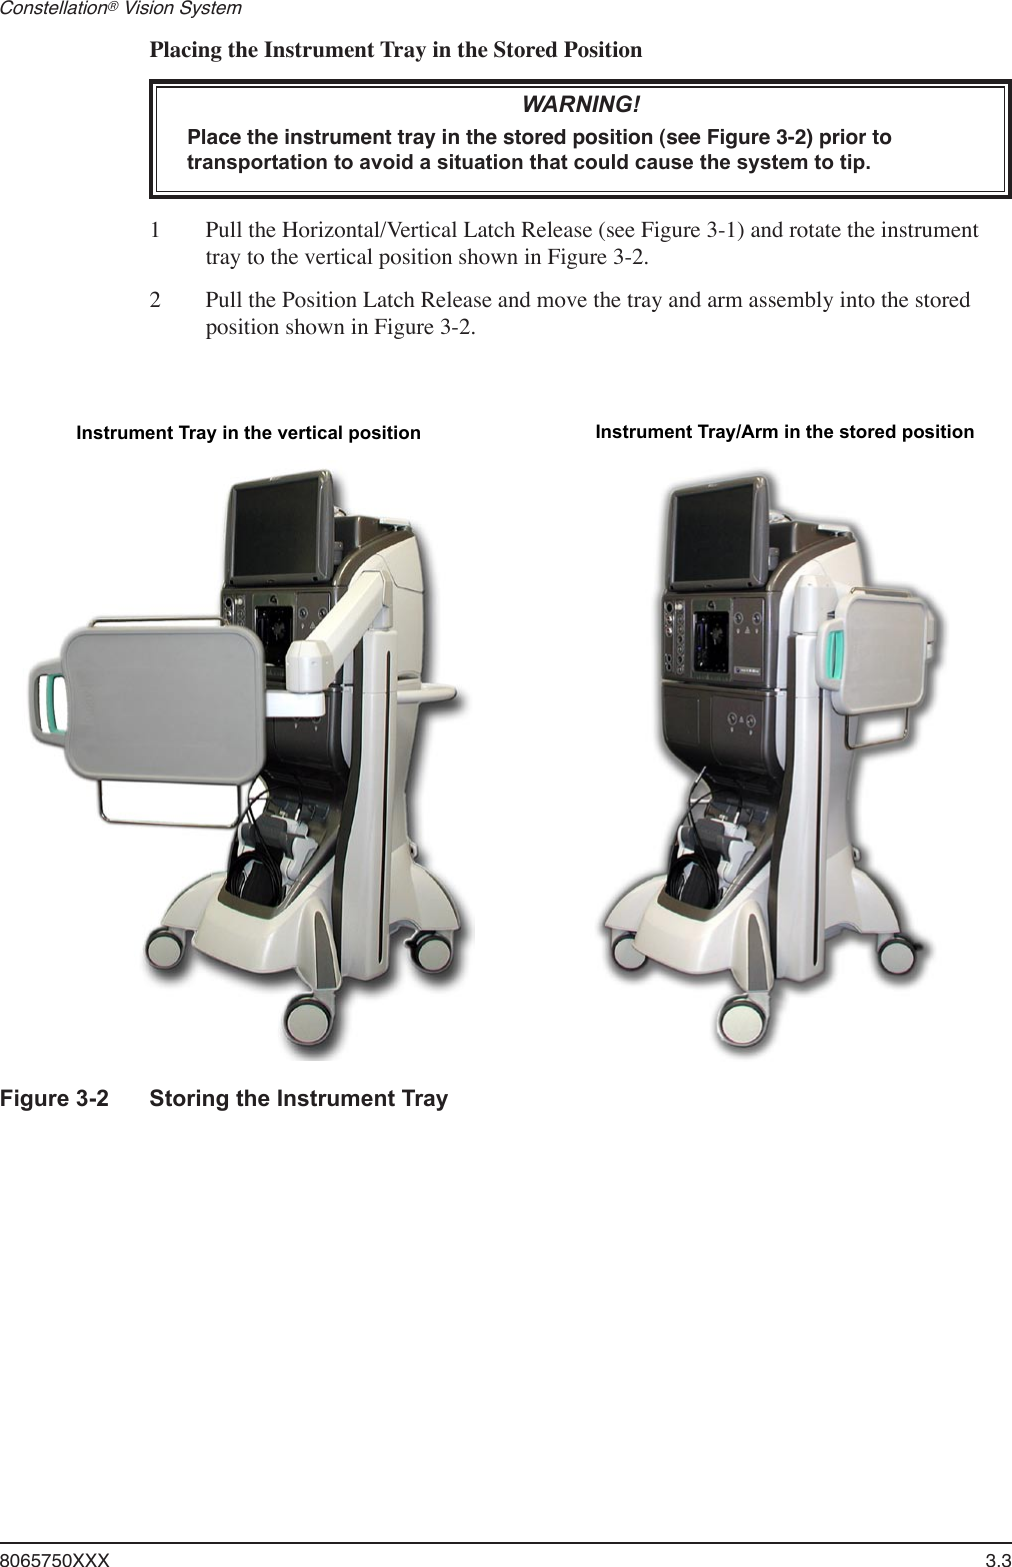 8065750XXX  3.3Constellation® Vision System Placing the Instrument Tray in the Stored PositionWARNING!Place the instrument tray in the stored position (see Figure 3-2) prior to transportation to avoid a situation that could cause the system to tip.1  Pull the Horizontal/Vertical Latch Release (see Figure 3-1) and rotate the instrument tray to the vertical position shown in Figure 3-2.2  Pull the Position Latch Release and move the tray and arm assembly into the stored position shown in Figure 3-2. Instrument Tray in the vertical position Instrument Tray/Arm in the stored positionFigure 3-2  Storing the Instrument Tray